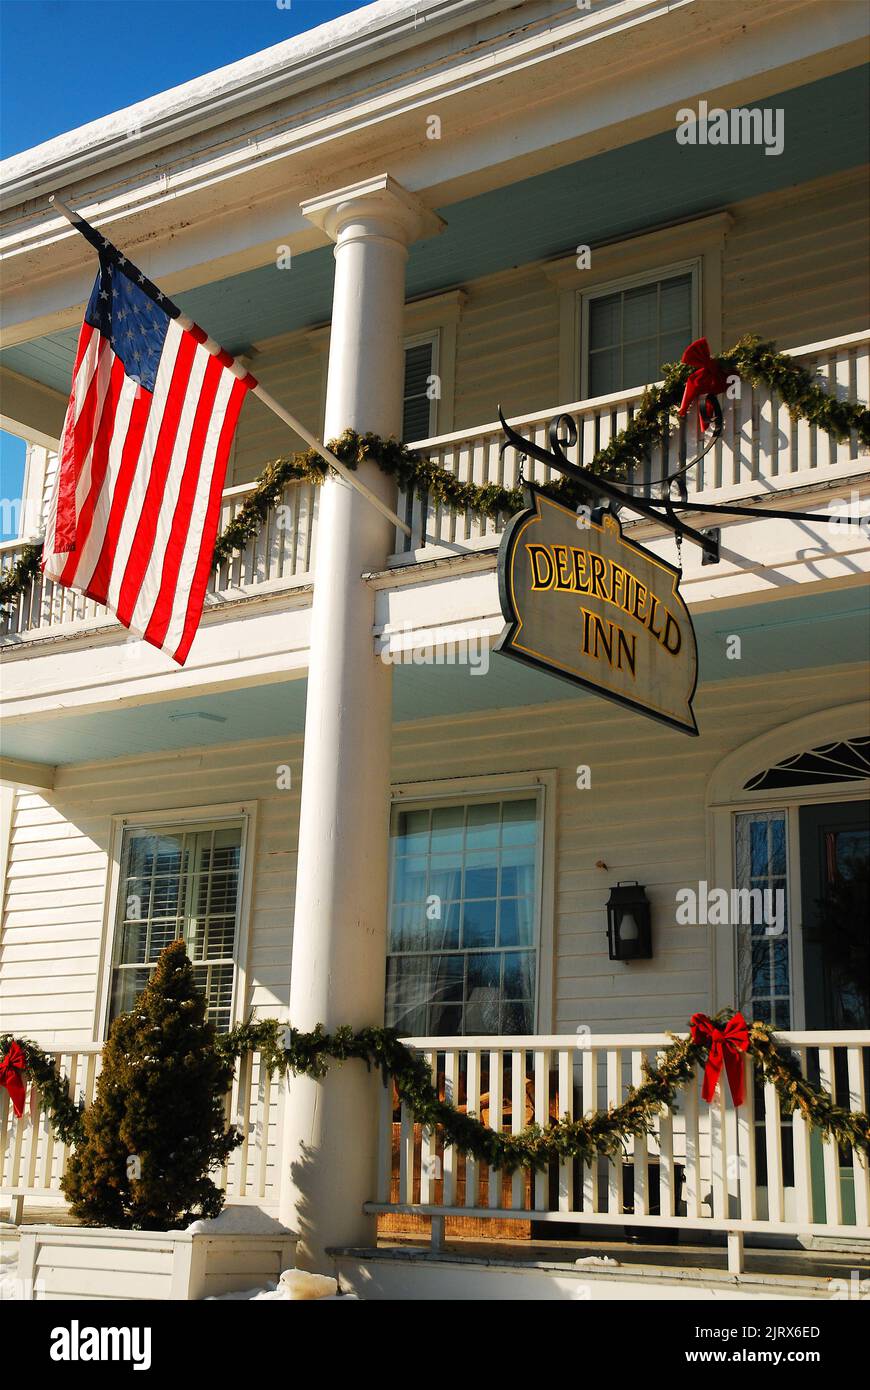 Holly and bows adorn the railing of the porch and balcony of the Deerfield Inn during the Christmas season Stock Photo